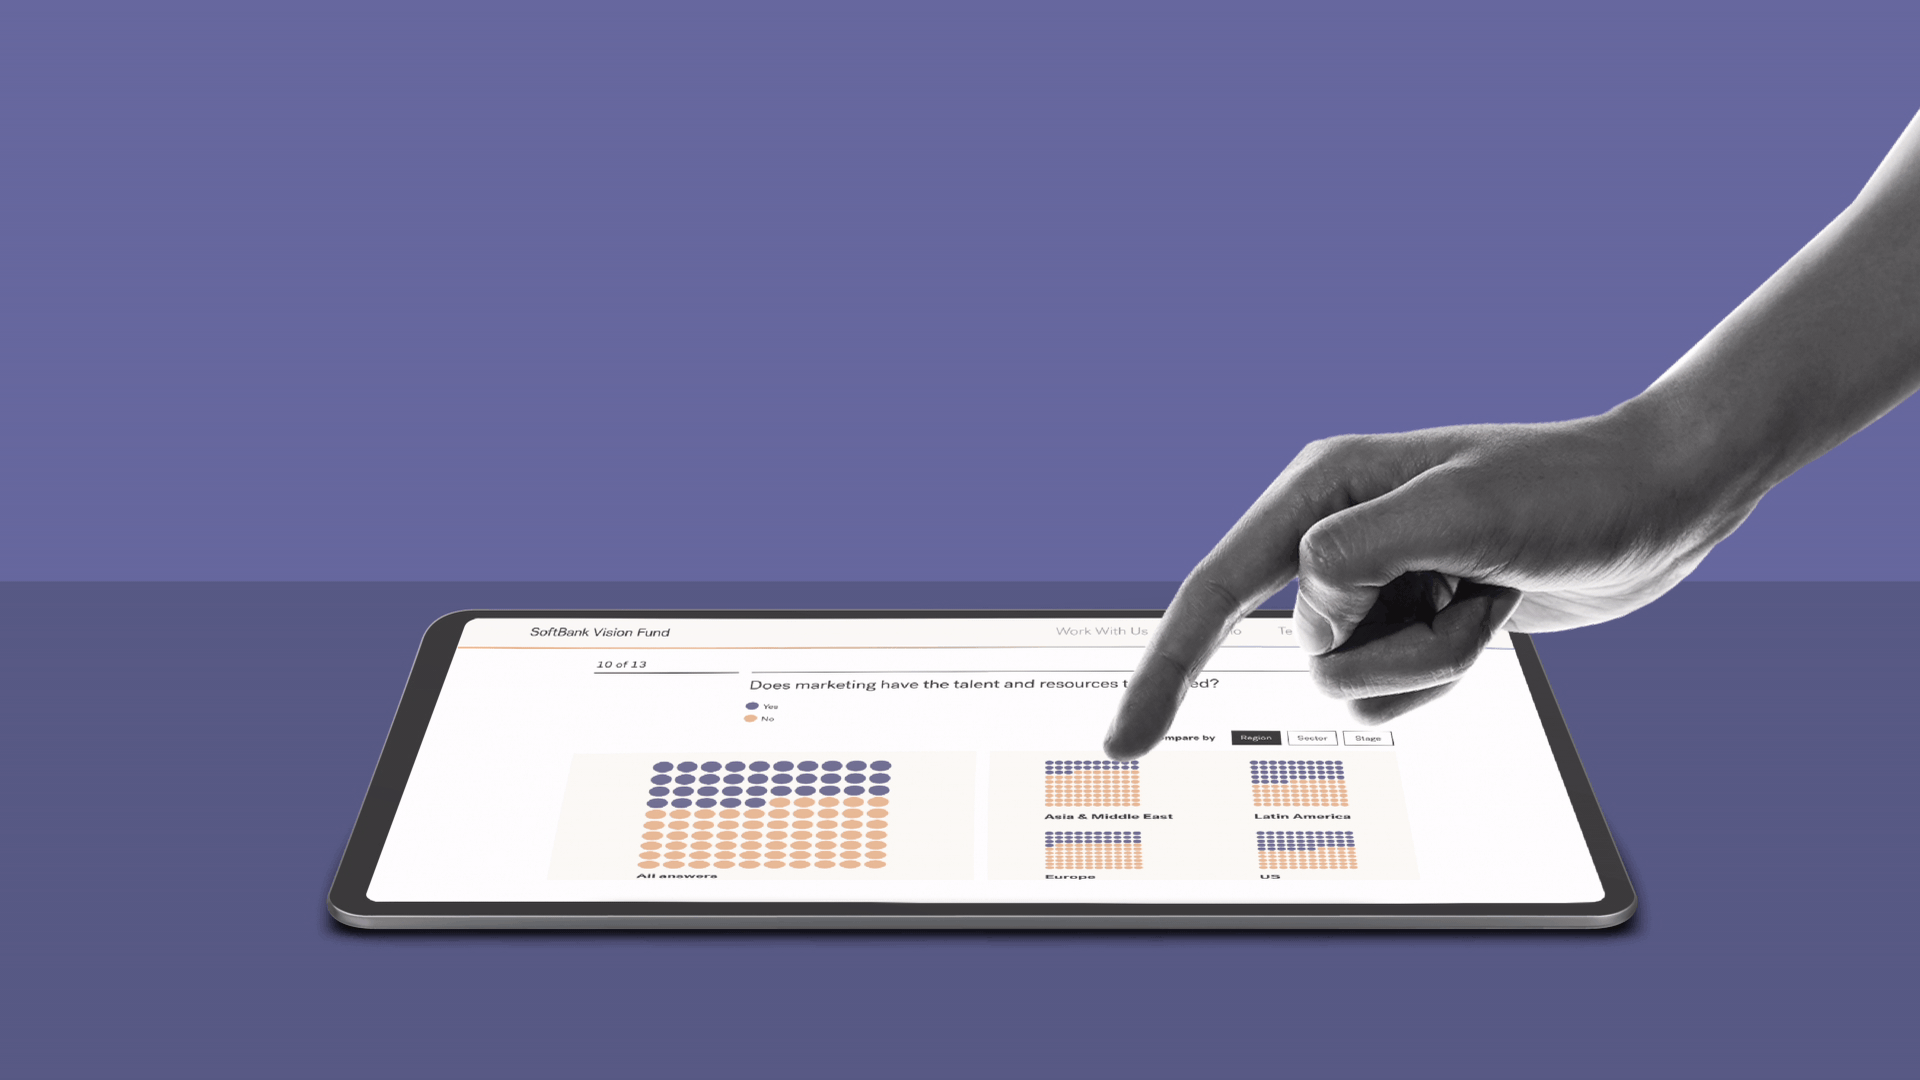 Animation of interactive data on an ipad, where the data elements are rising from the screen.